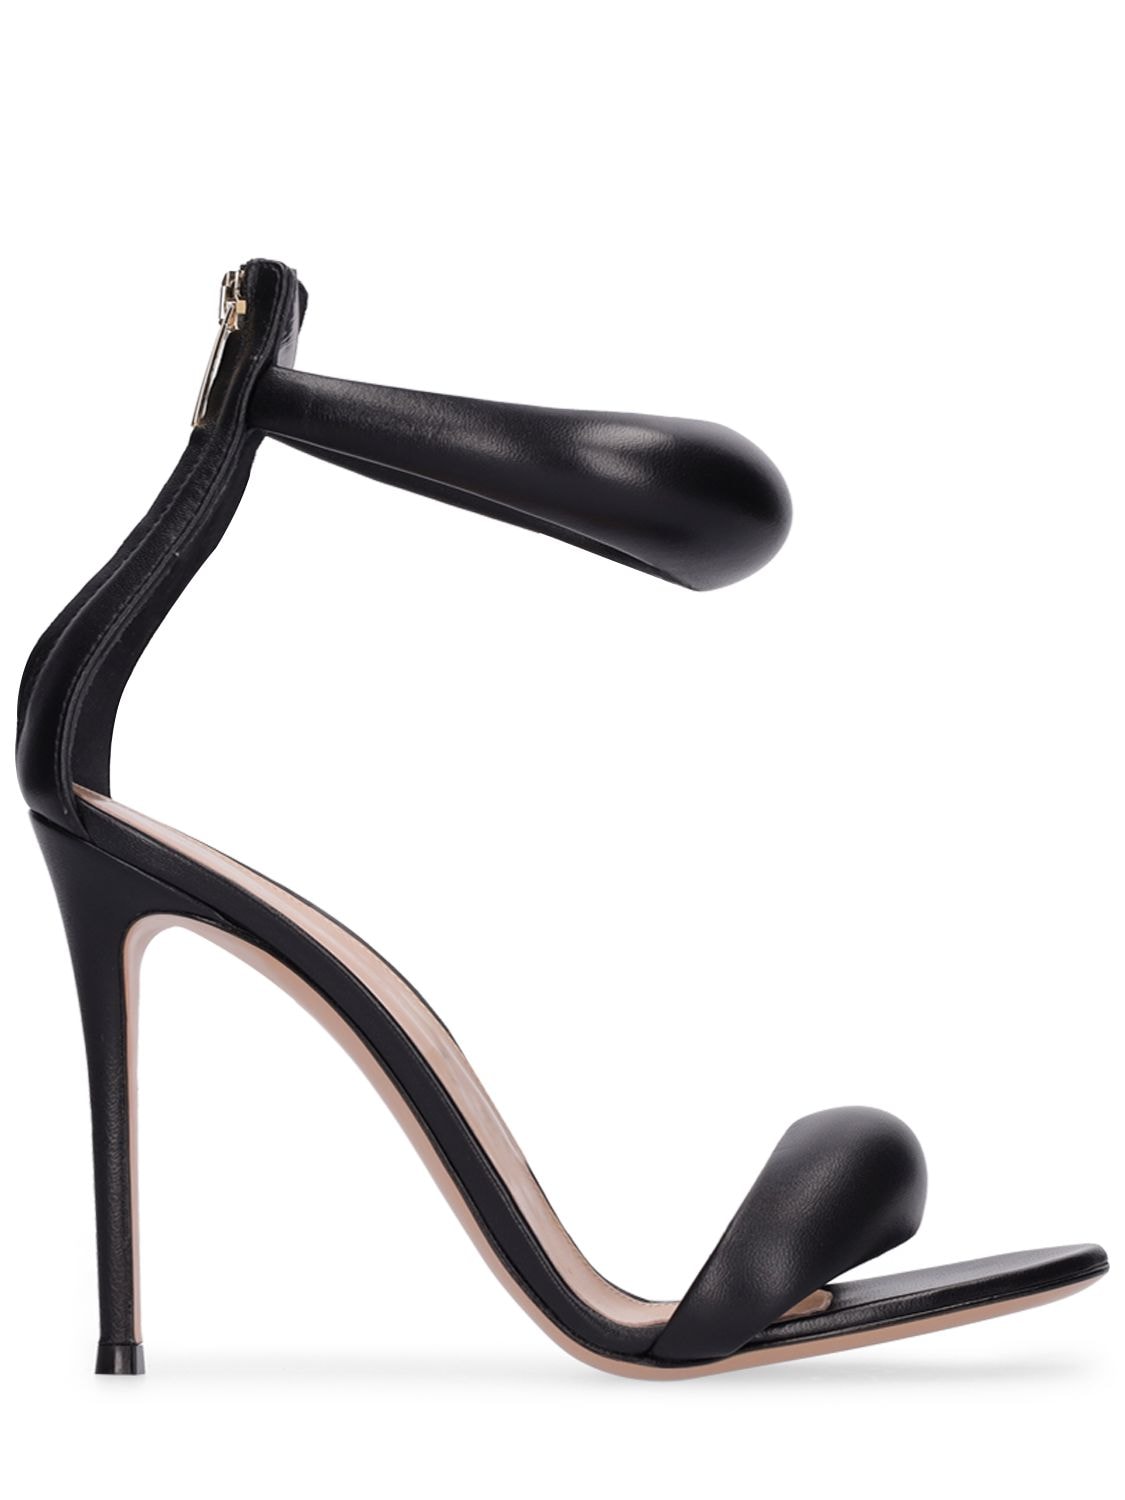 Gianvito Rossi Bijoux 105mm Puffy Napa Ankle-cuff High-heel Sandals In Black